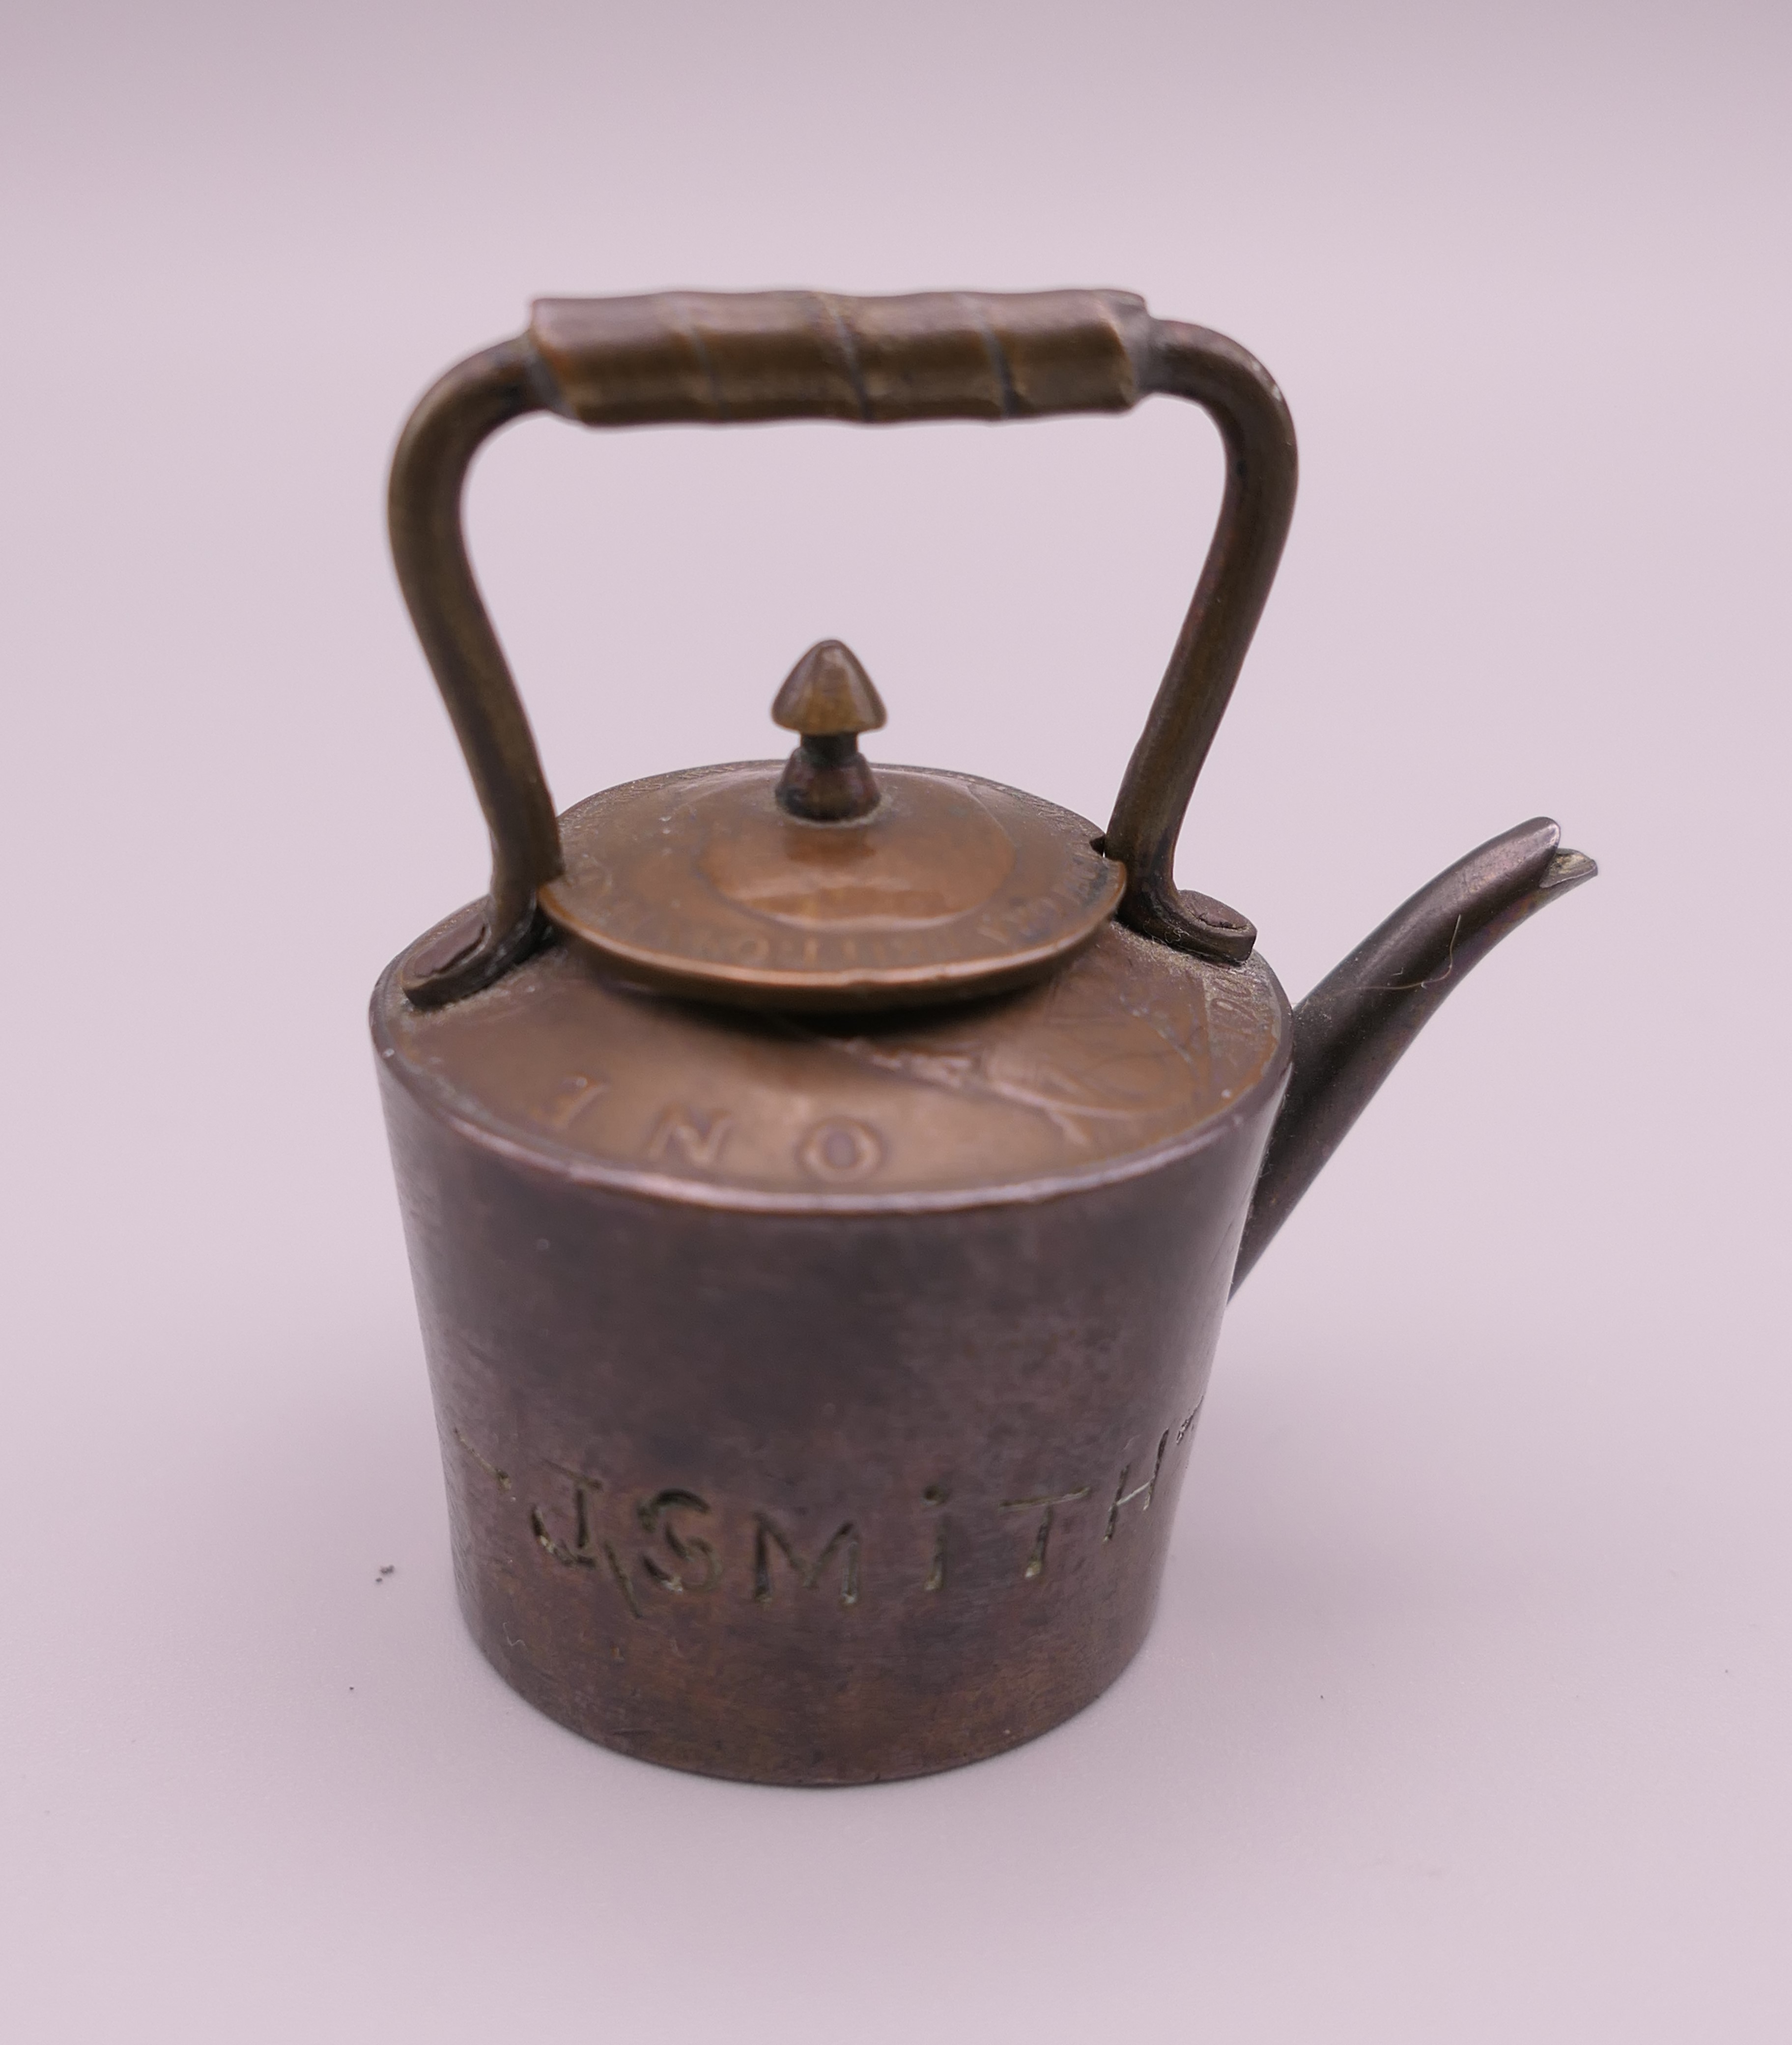 A doll's house copper kettle, made from old copper coins. 5 cm high.